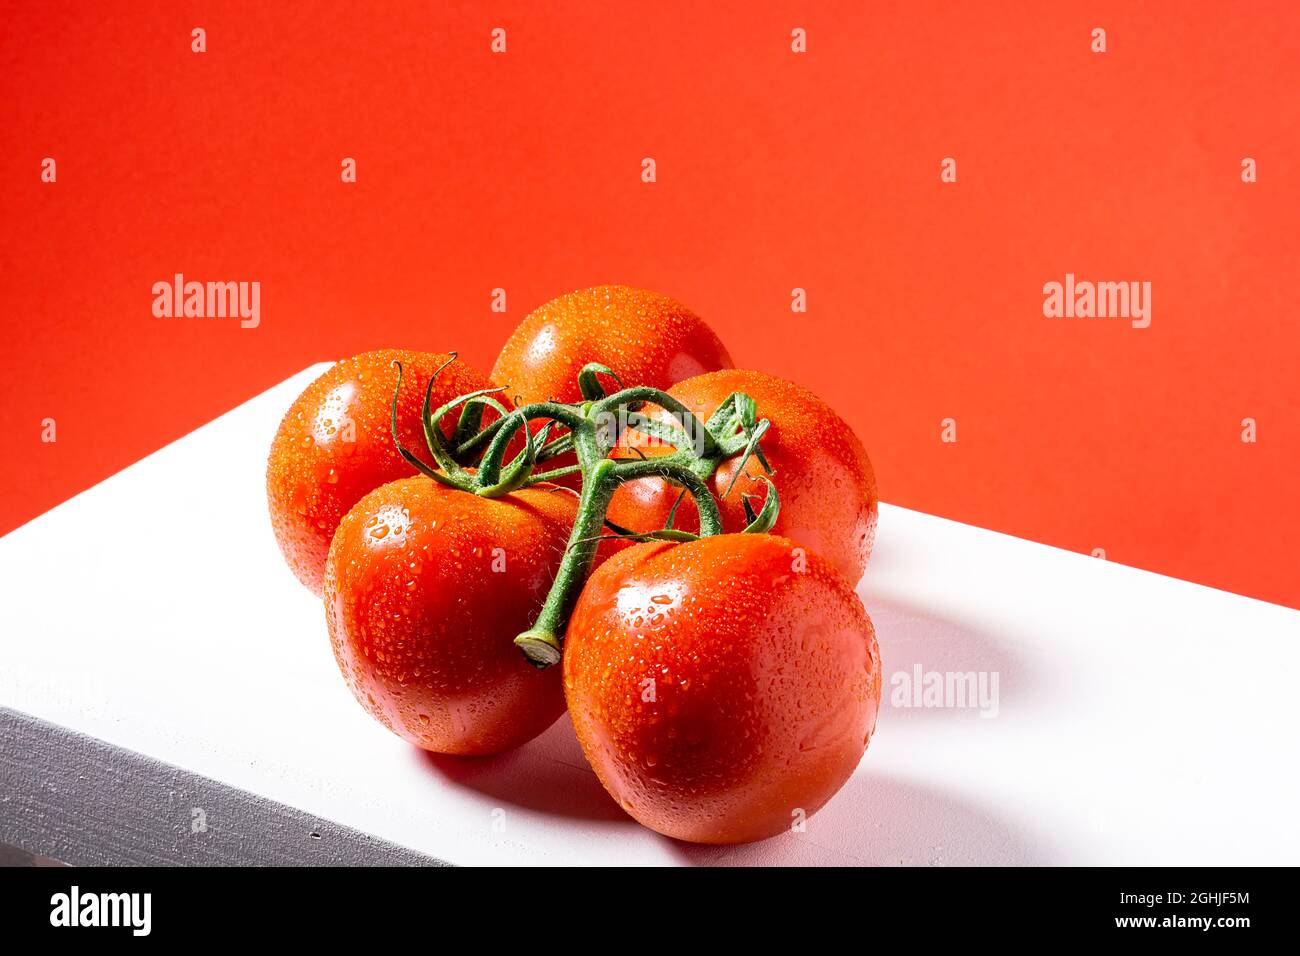 Photo of a bouquet of five wet red natural tomatoes on a white table and a red background.The photograph is taken in horizontal format. Stock Photo